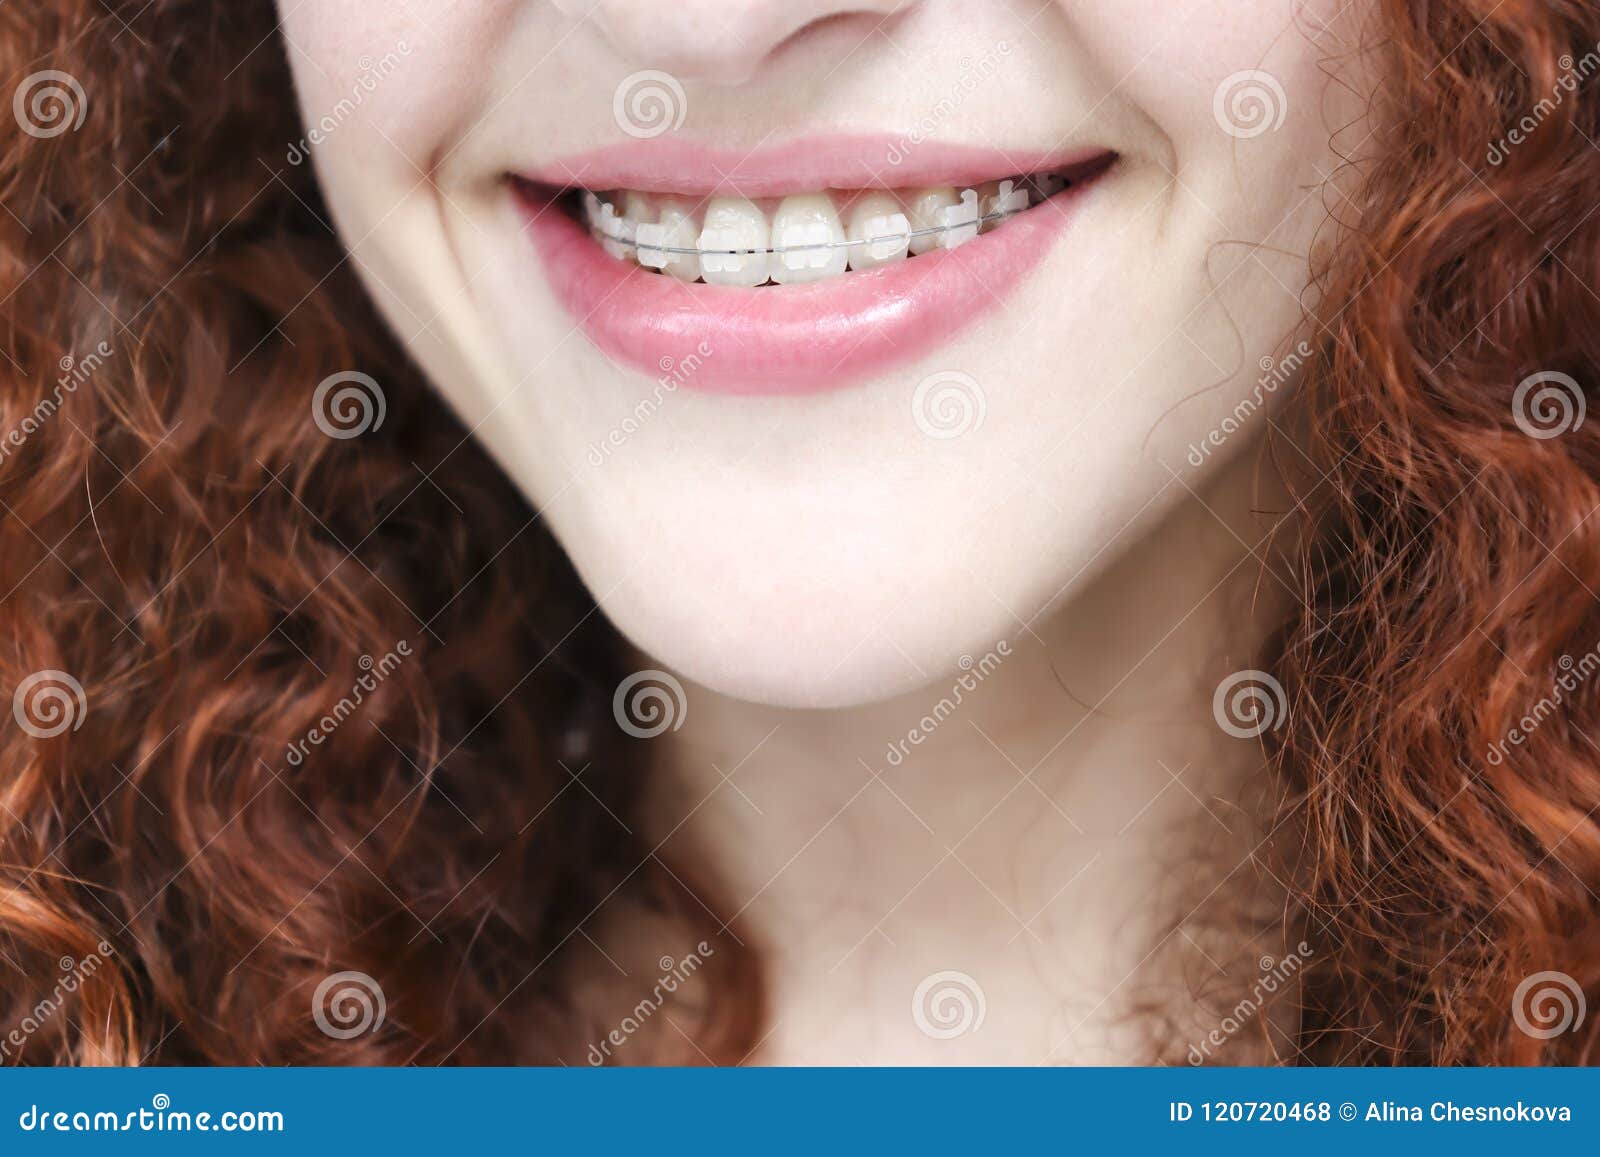 Redheads With Braces